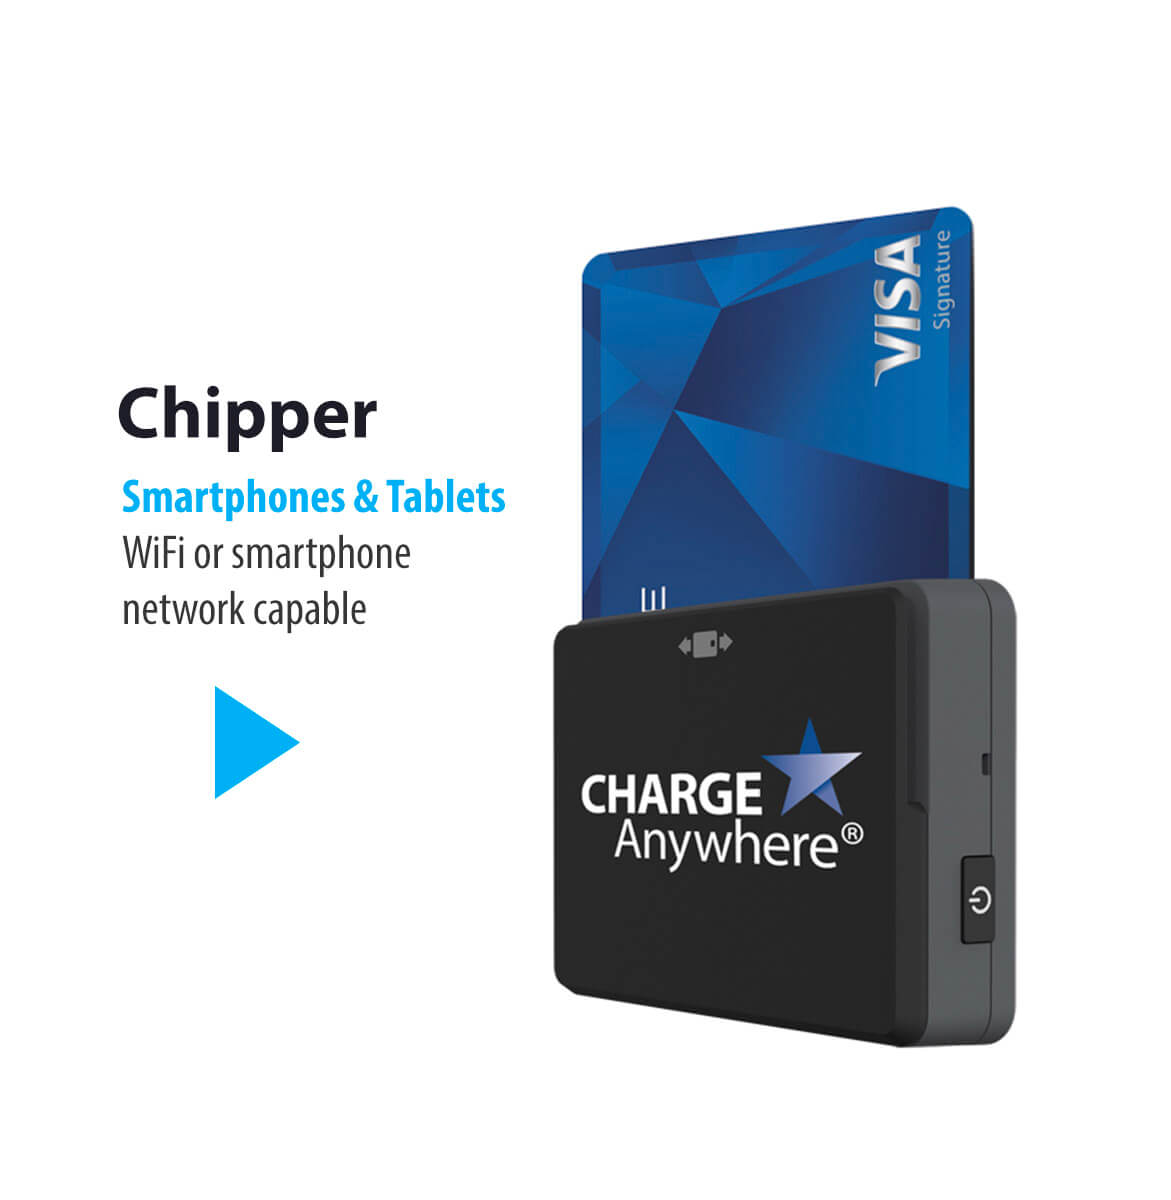 Chipper for smartphones & tablets wifi or smartphone network capable